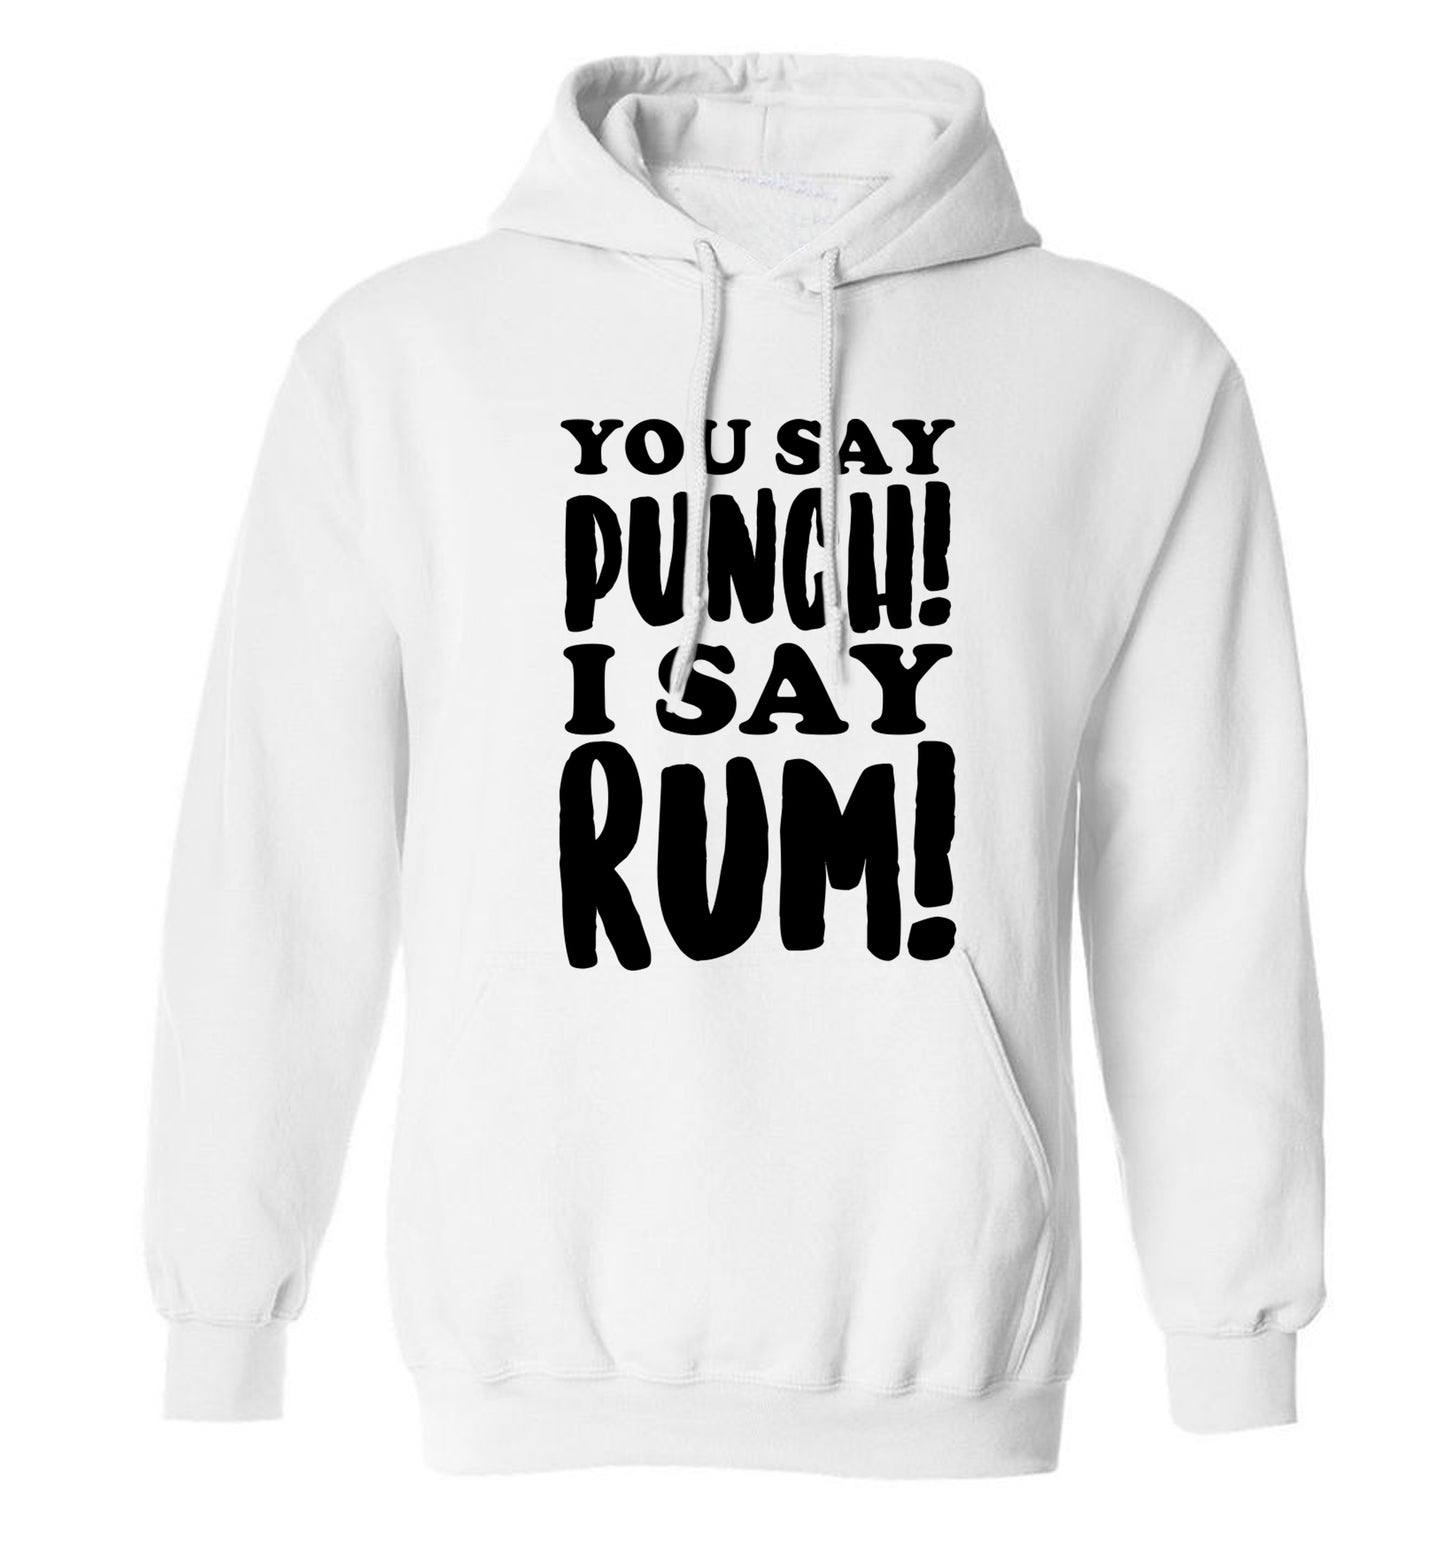 You say punch I say rum! adults unisex white hoodie 2XL